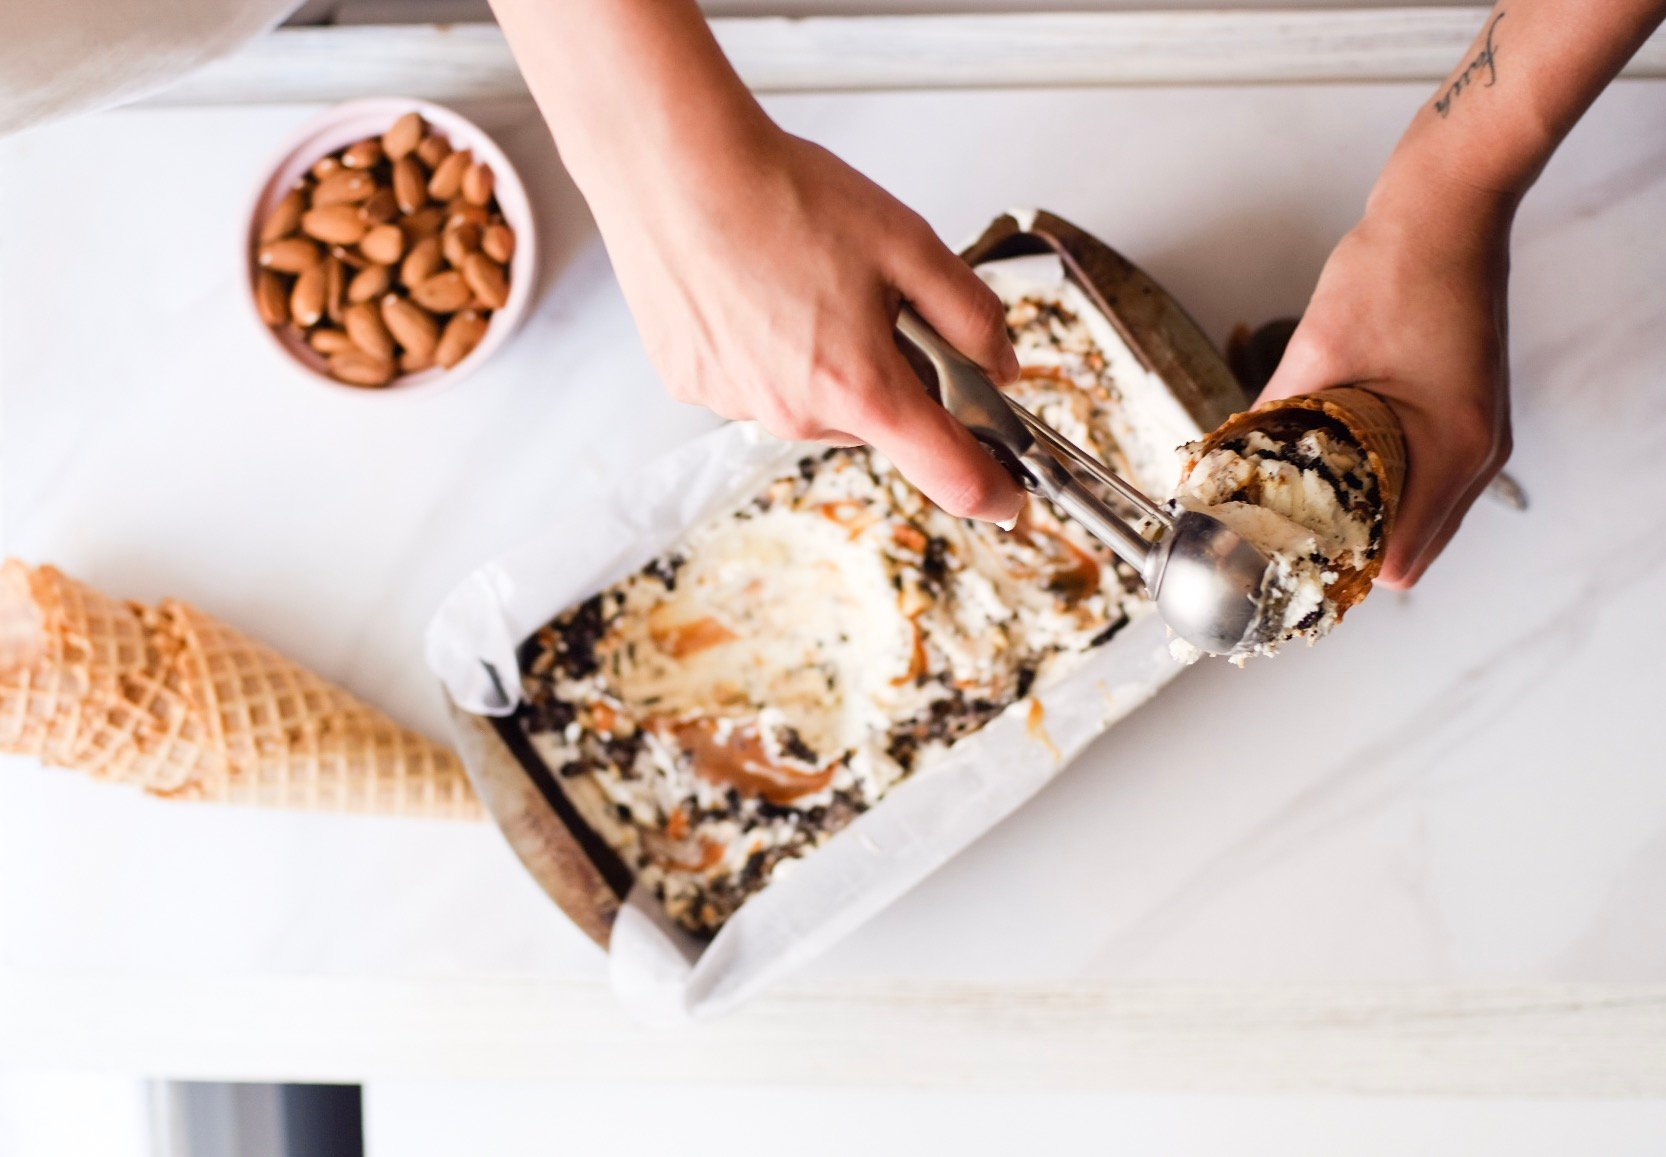 Lifestyle Blogger Chocolate and Lace shares her recipe for Oreo Salted Almond Caramel Swirl Homemade Ice Cream.